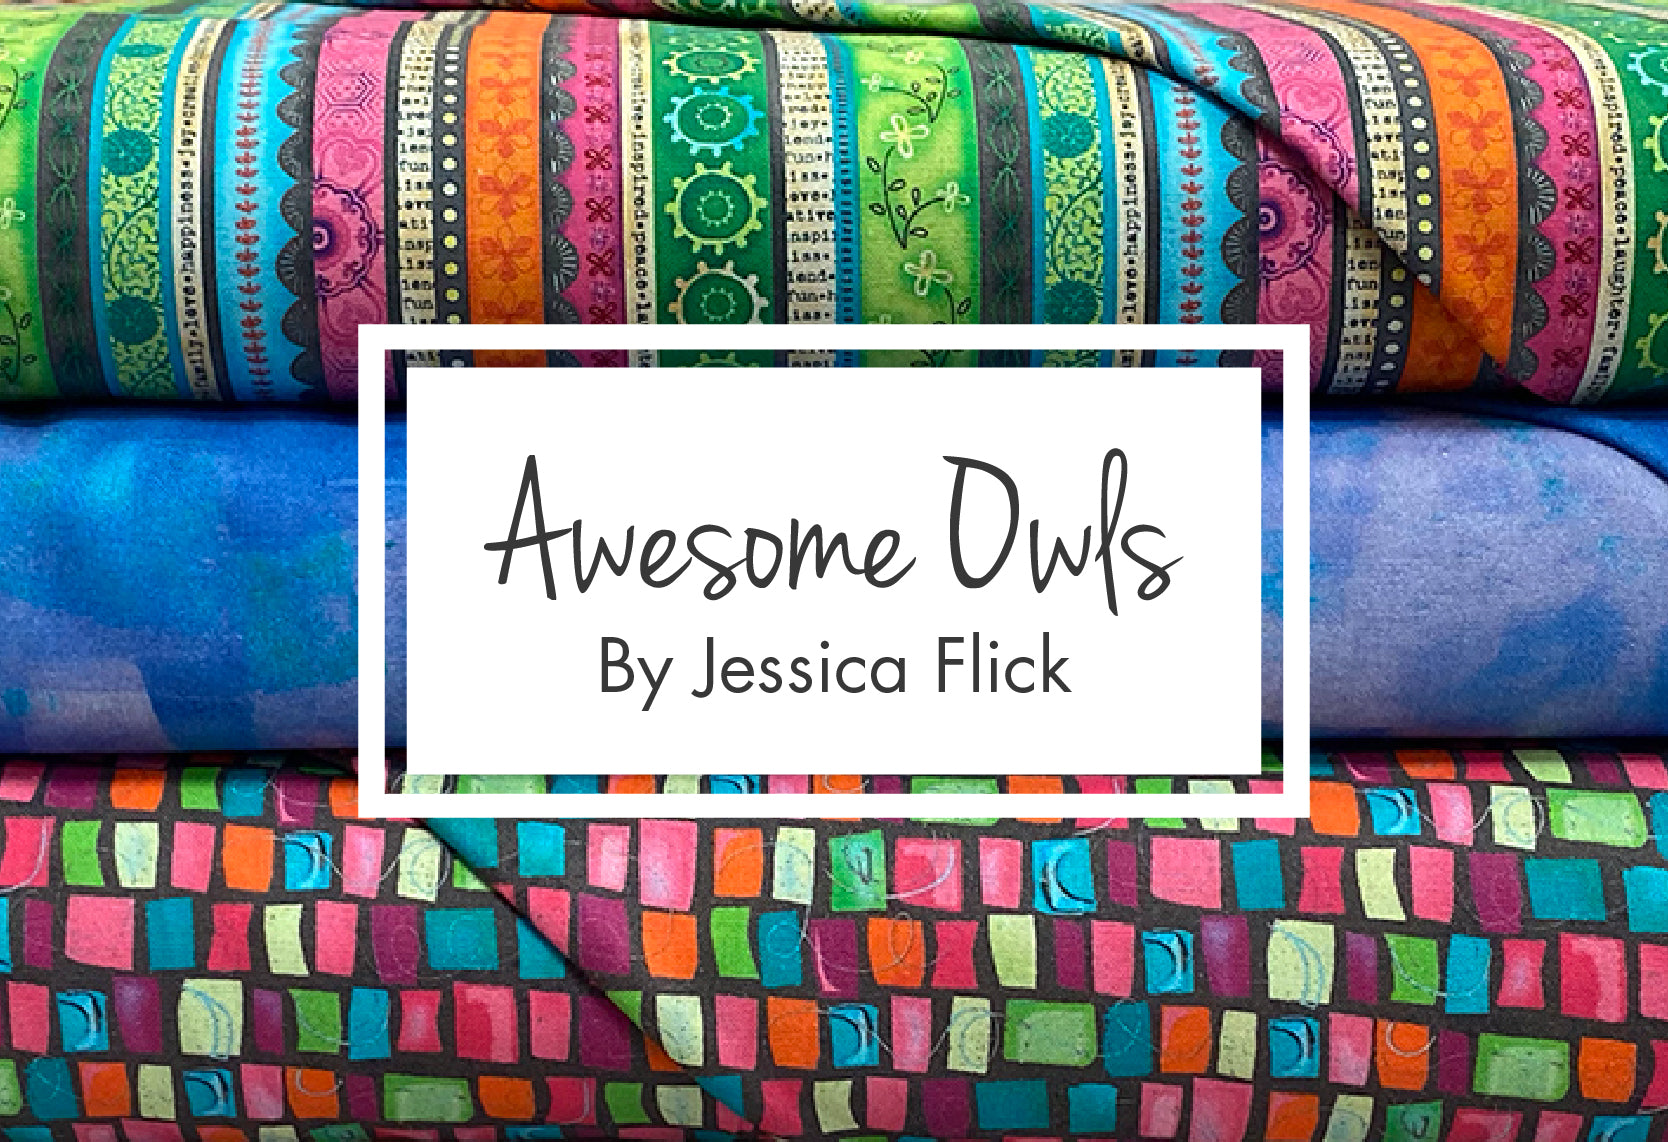 Awesome Owls (Accents) by Jessica Flick